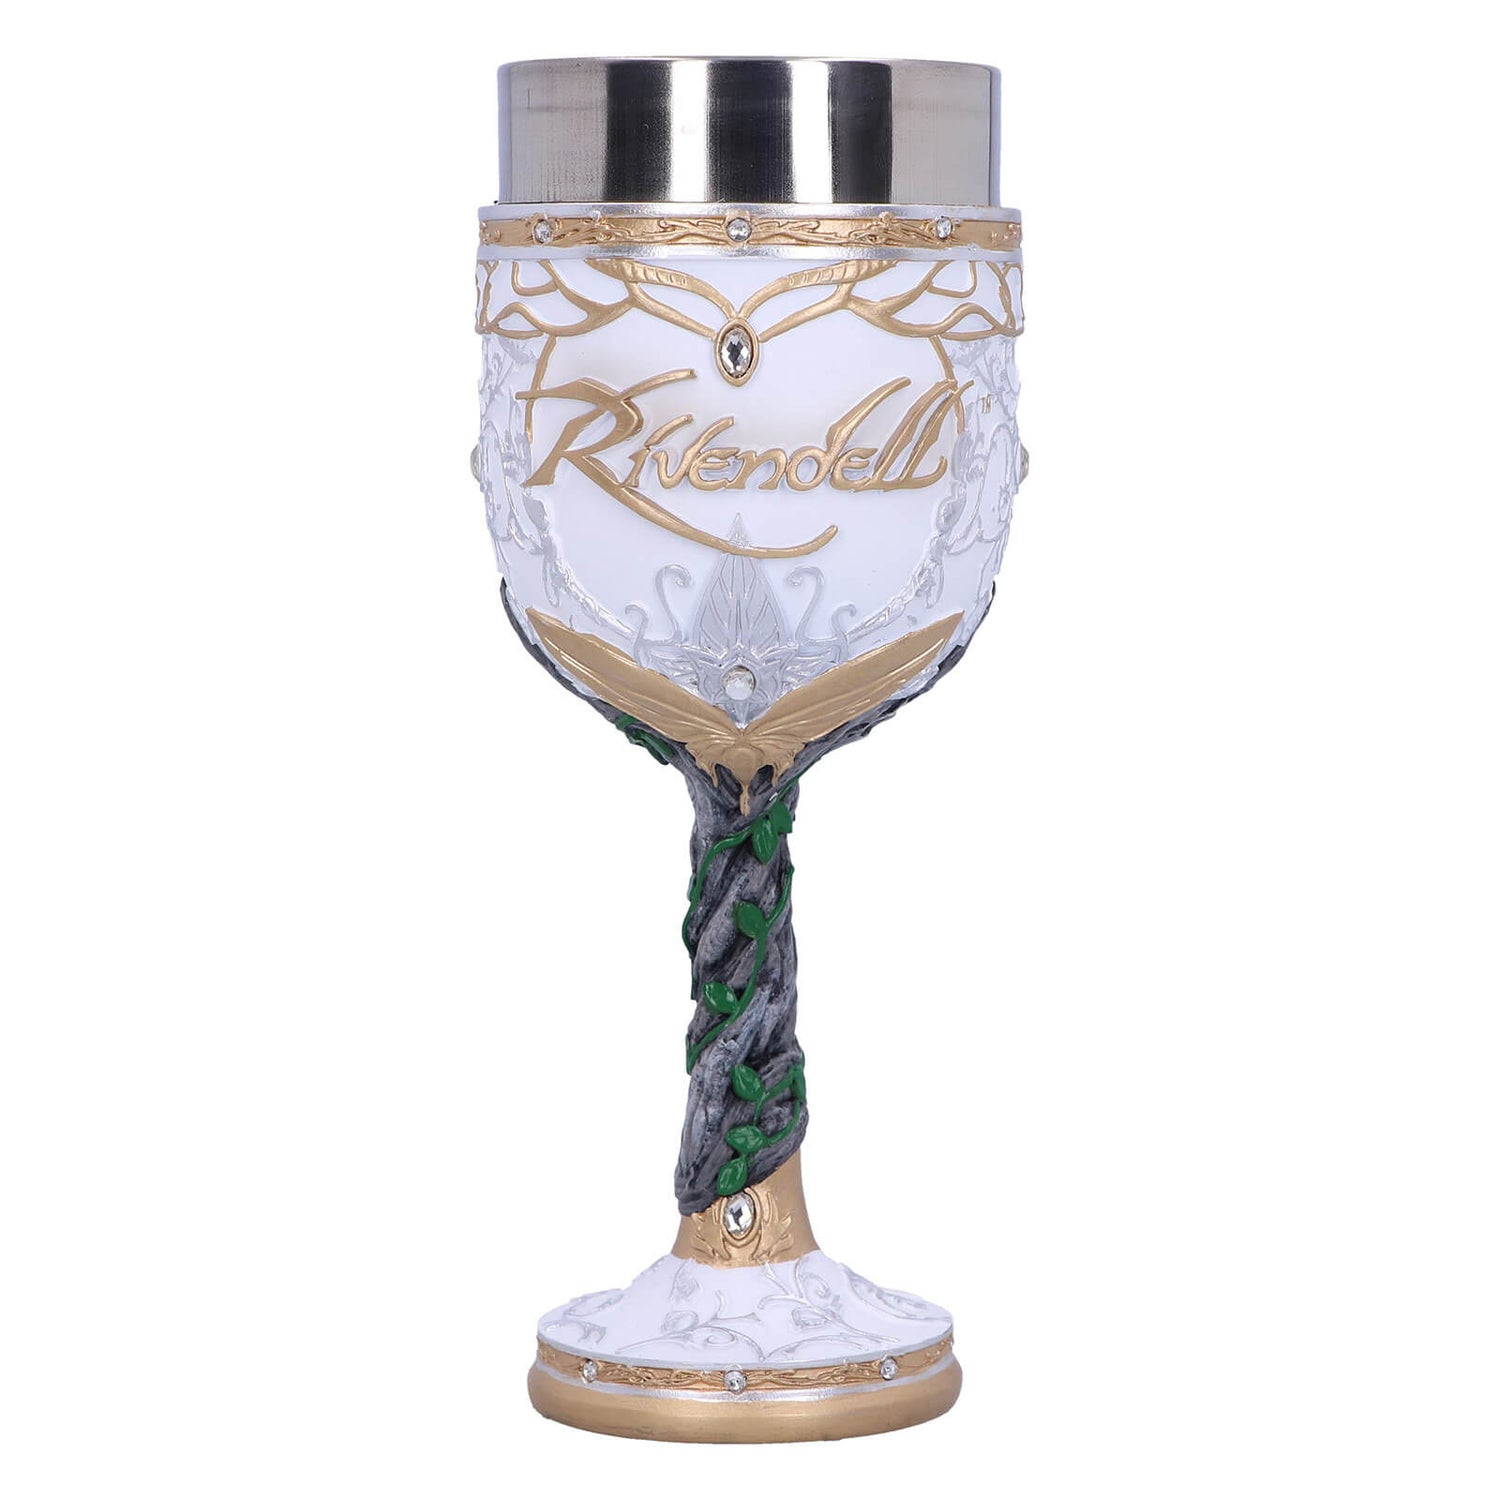 Lord of the Rings Rivendell Collectible Goblet 19.5cm